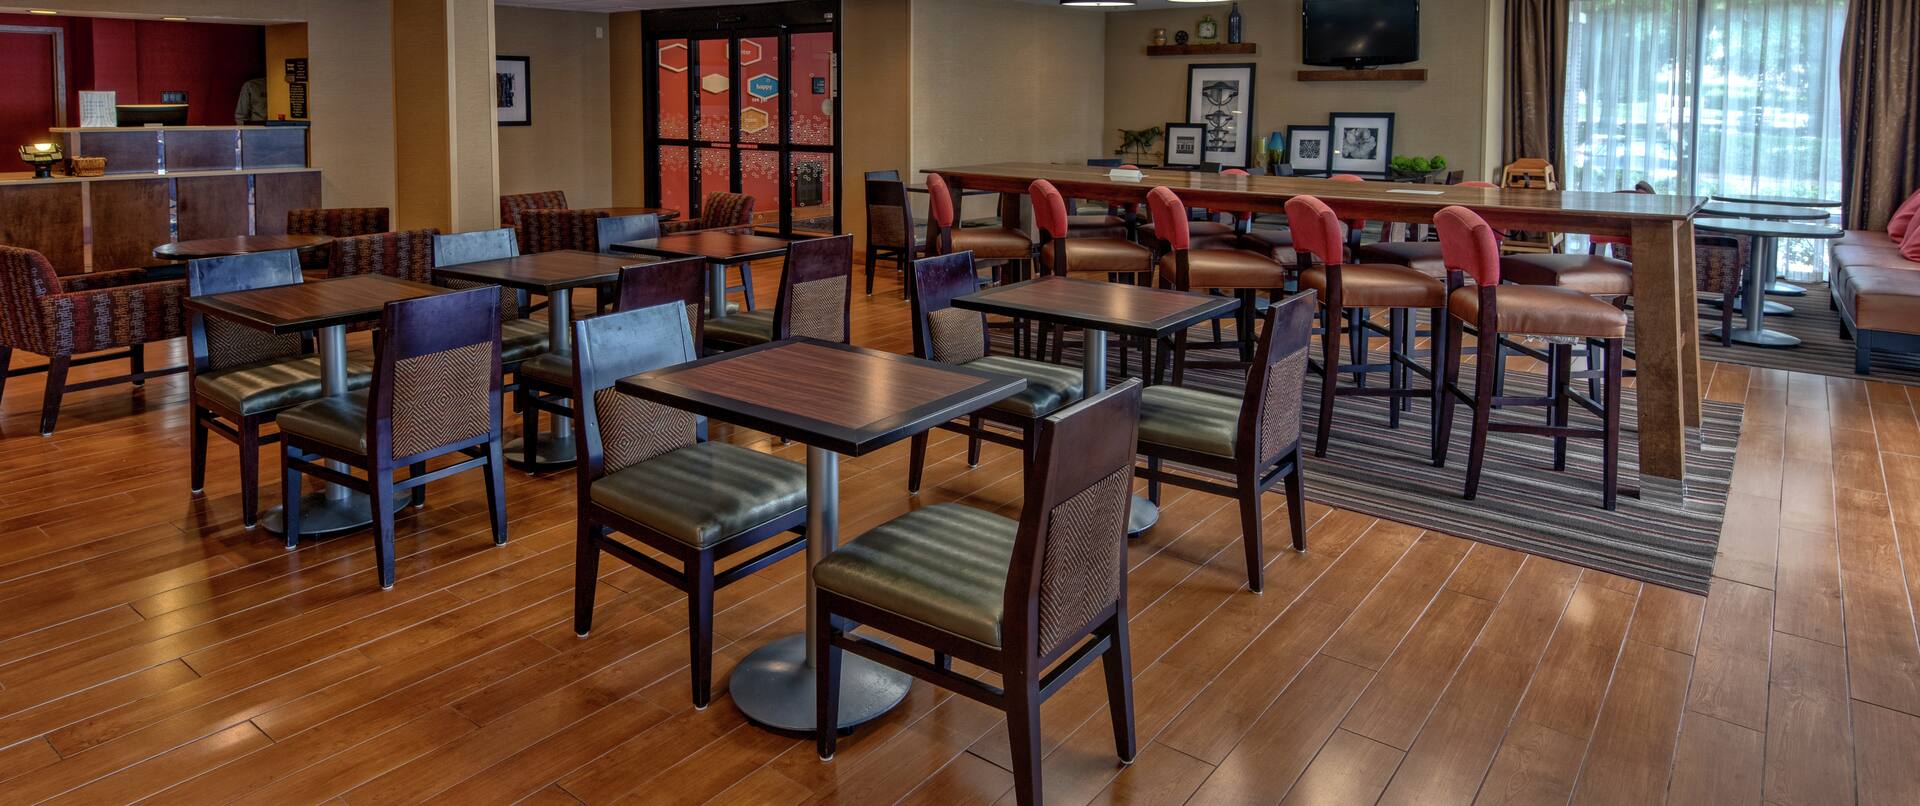 Dining Tables and Chairs in Lobby Breakfast Area